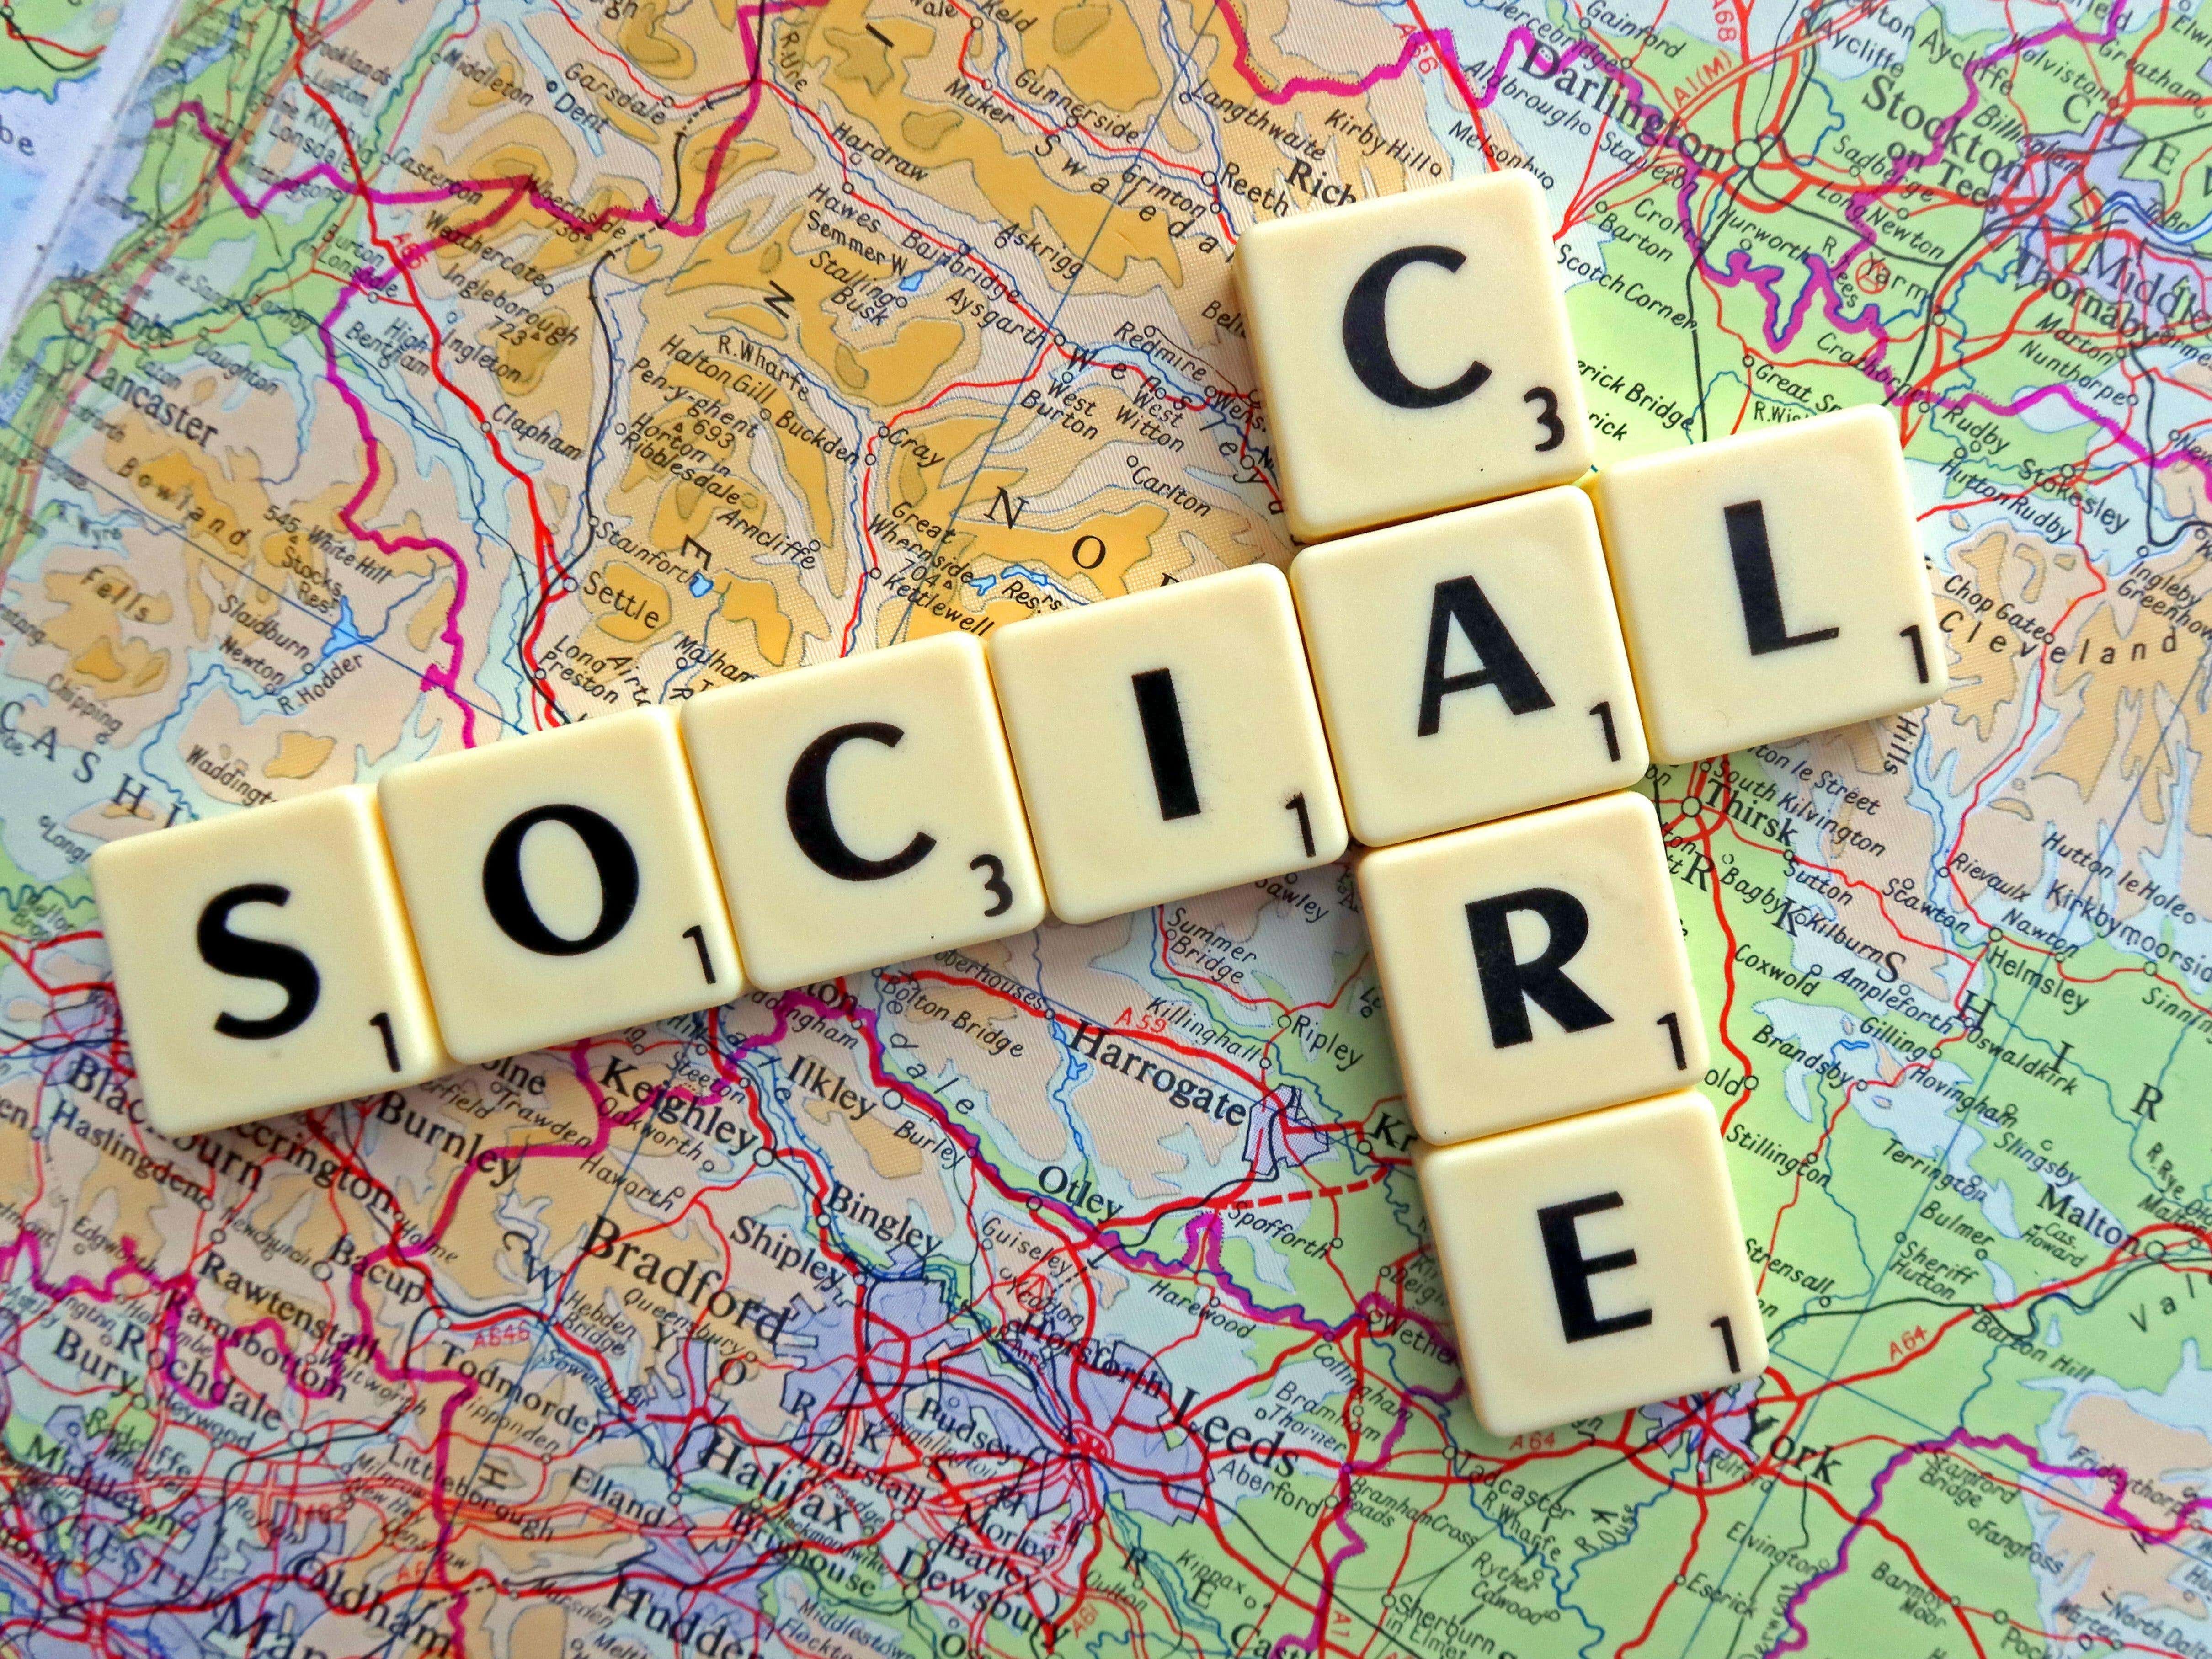 Social care body says ‘clear case for change’ as new workforce strategy launched